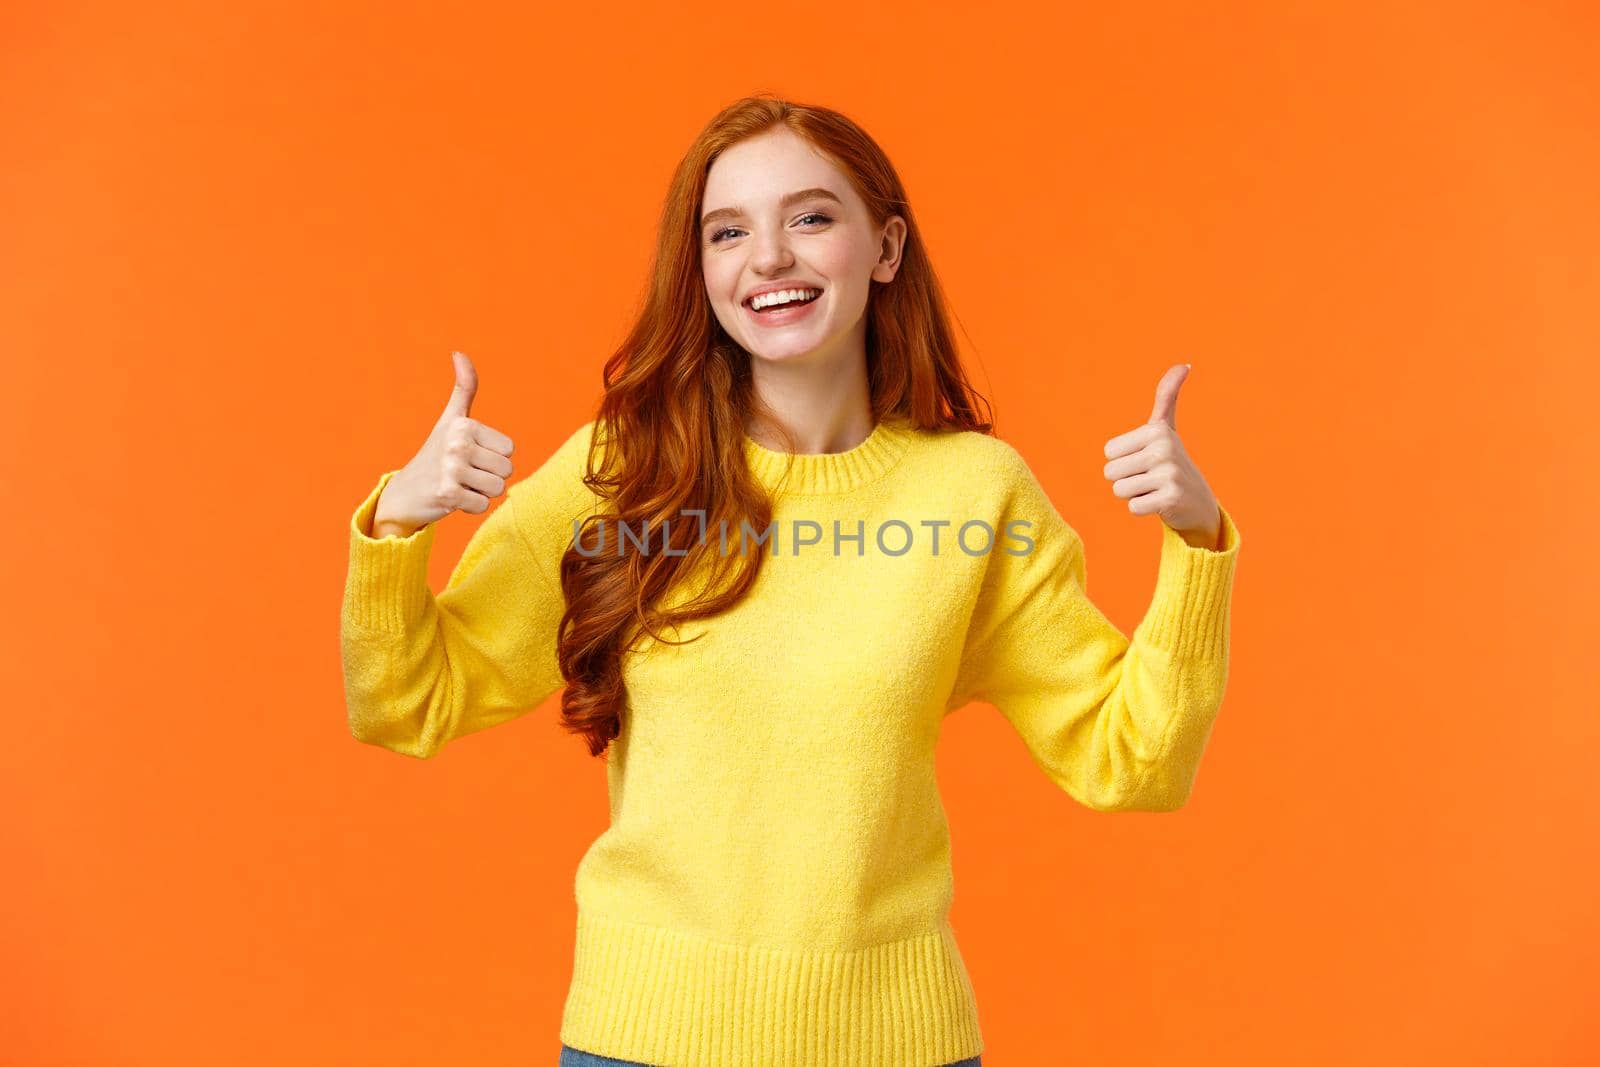 Holidays, gestures, people concept. Cheerful cute redhead girl smiling and showing thumbs-up recommend product, give positive reply, agree or like something, nod agreement, orange background.